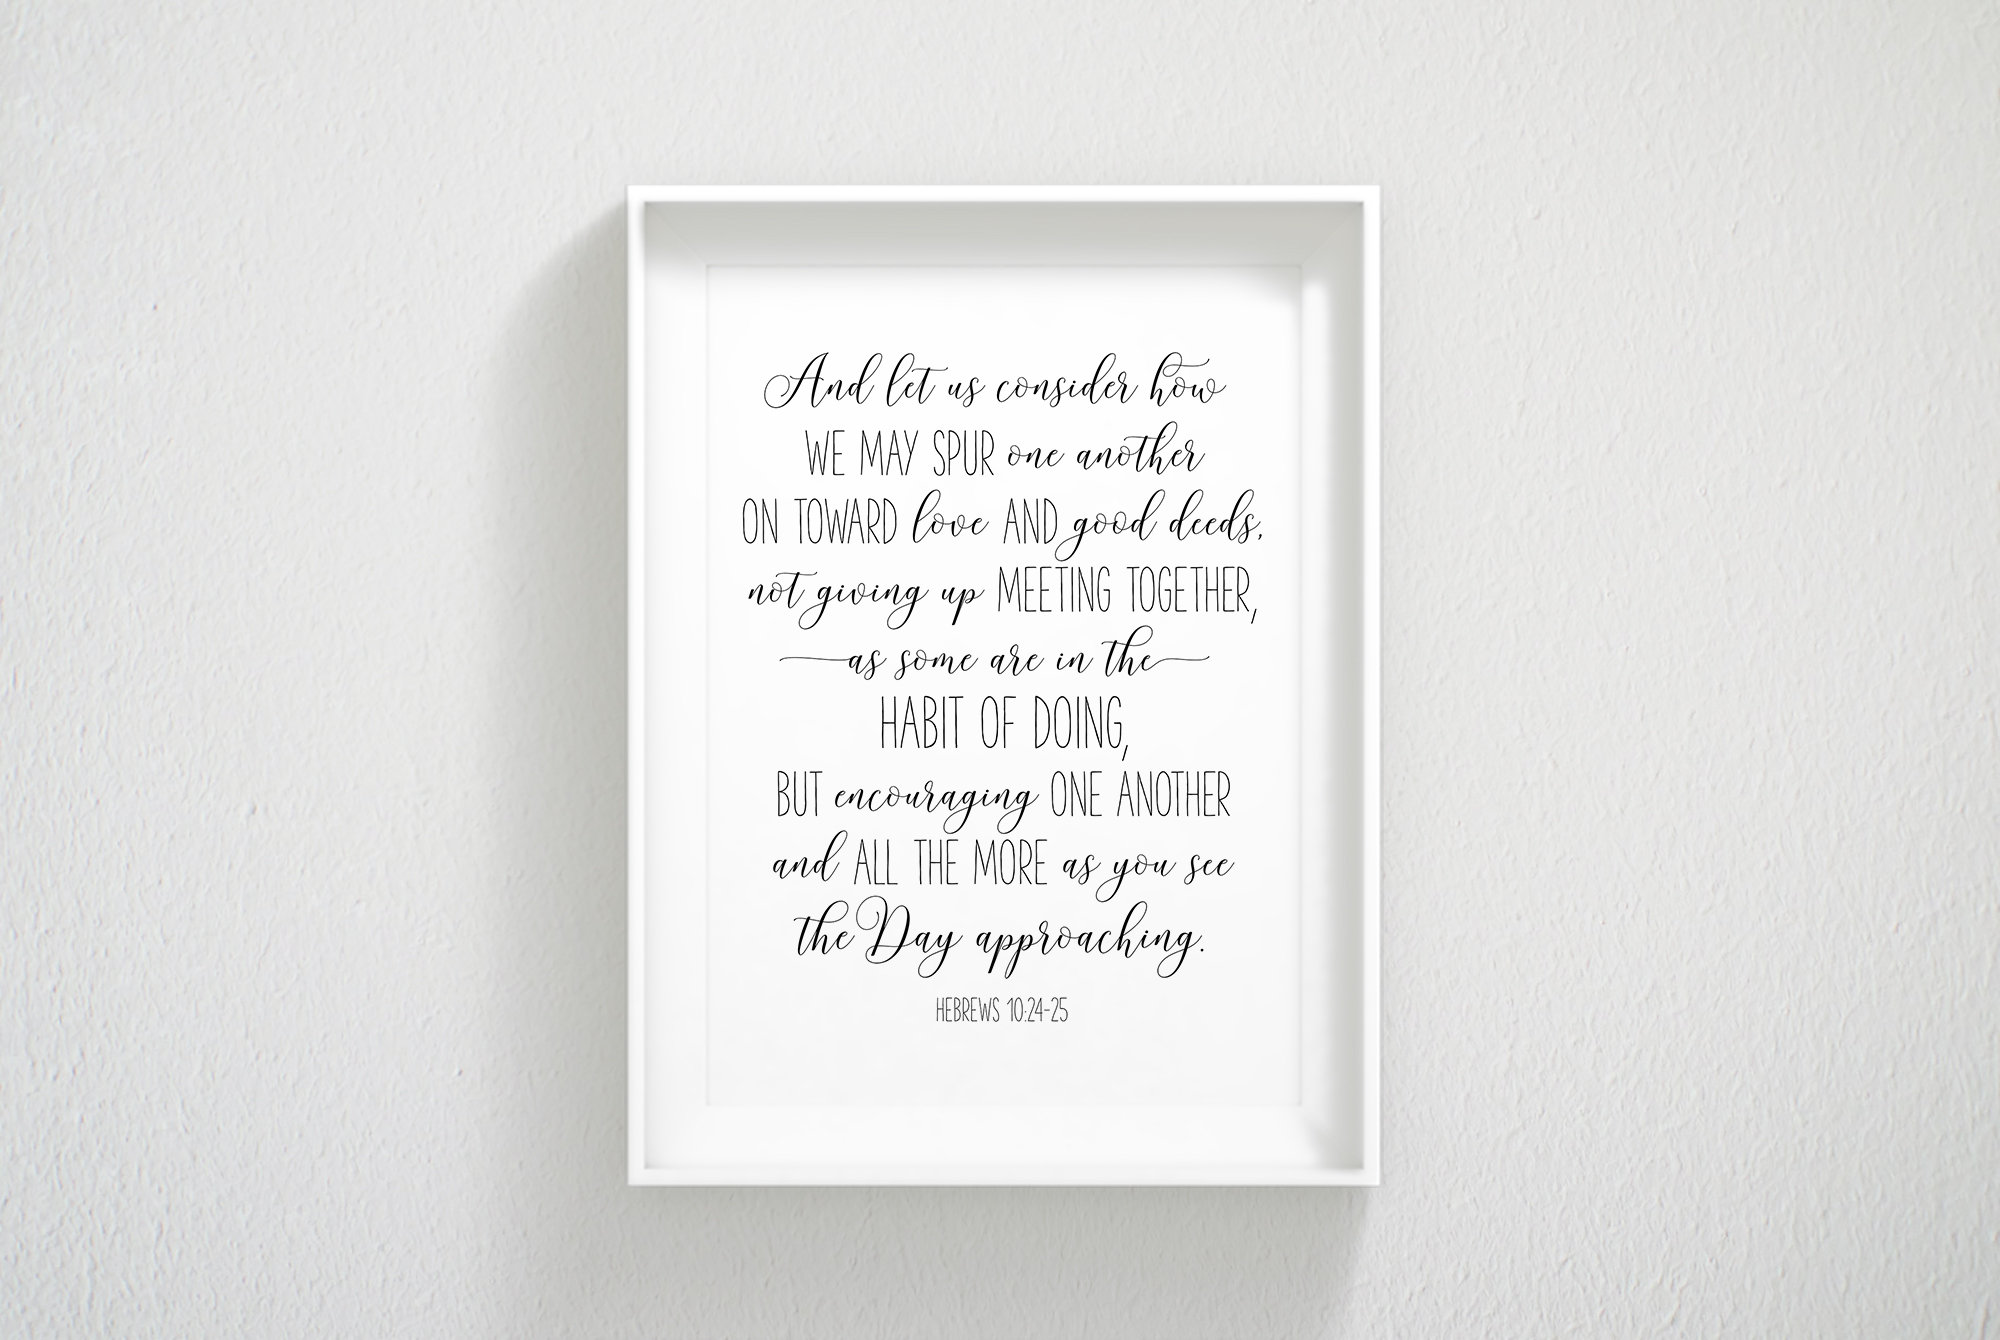 Let Us Consider How We May Spur One Another, Hebrews 10:24, Bible Verse Printable Wall Art